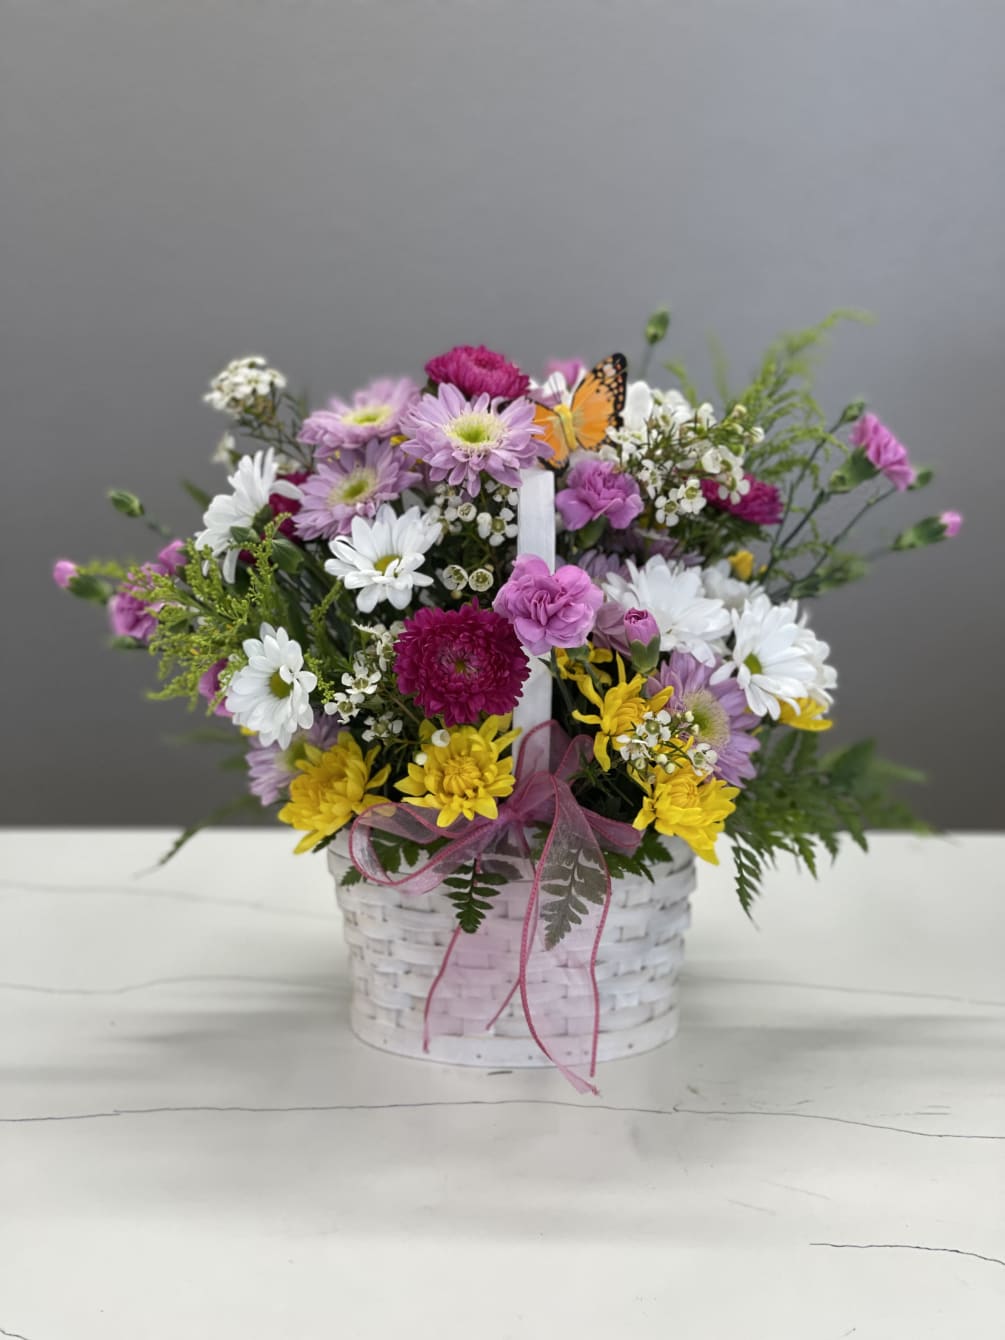 Filled with happy spring flowers, this is the perfect gift for someone